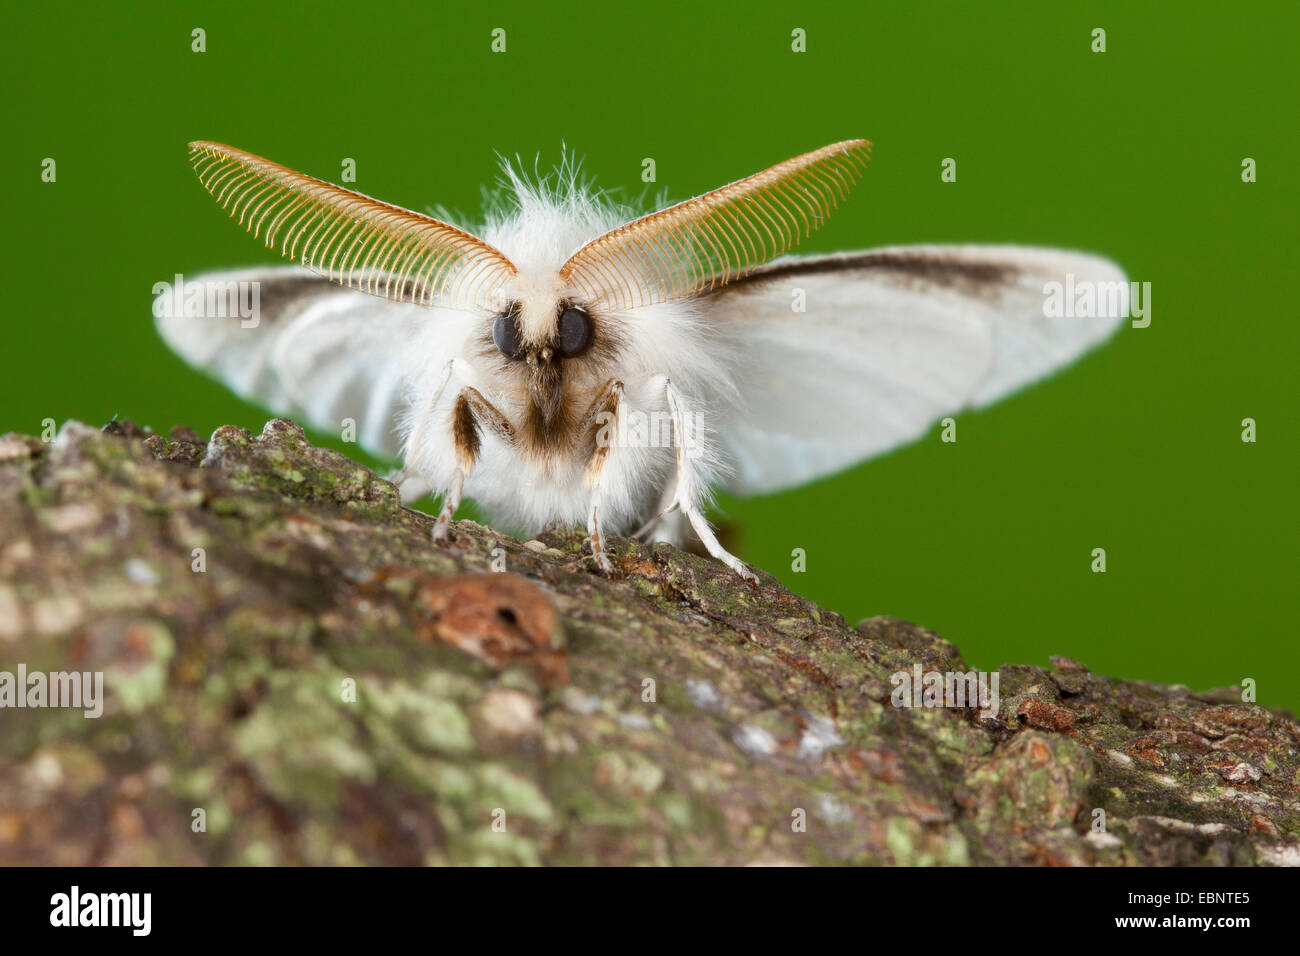 Brown-tail moth, Brown-tail (Euproctis chrysorrhoea), with faned out antennae, Germany Stock Photo